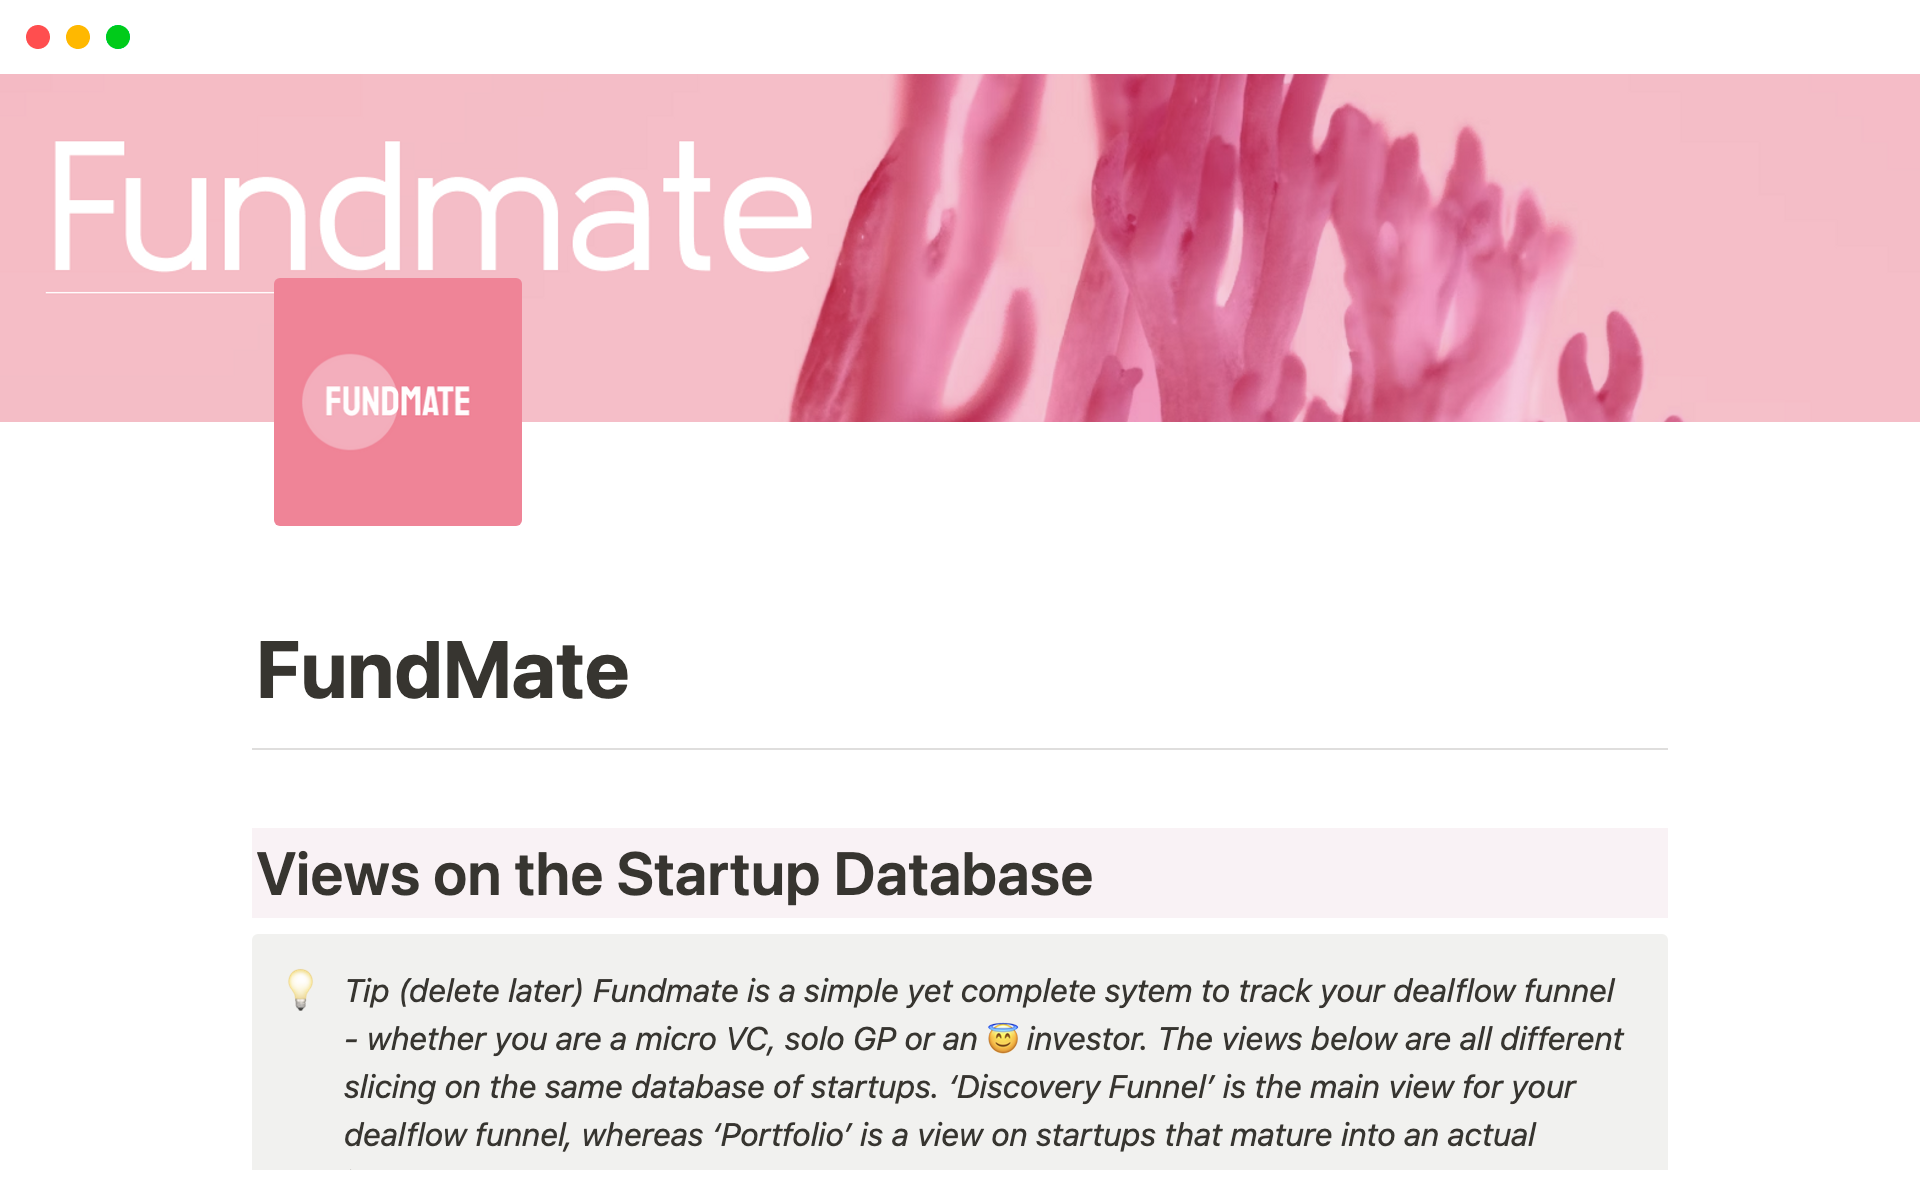 FundMate is a simple dealflow and portfolio CRM designed specifically for micro VCs and angels investors